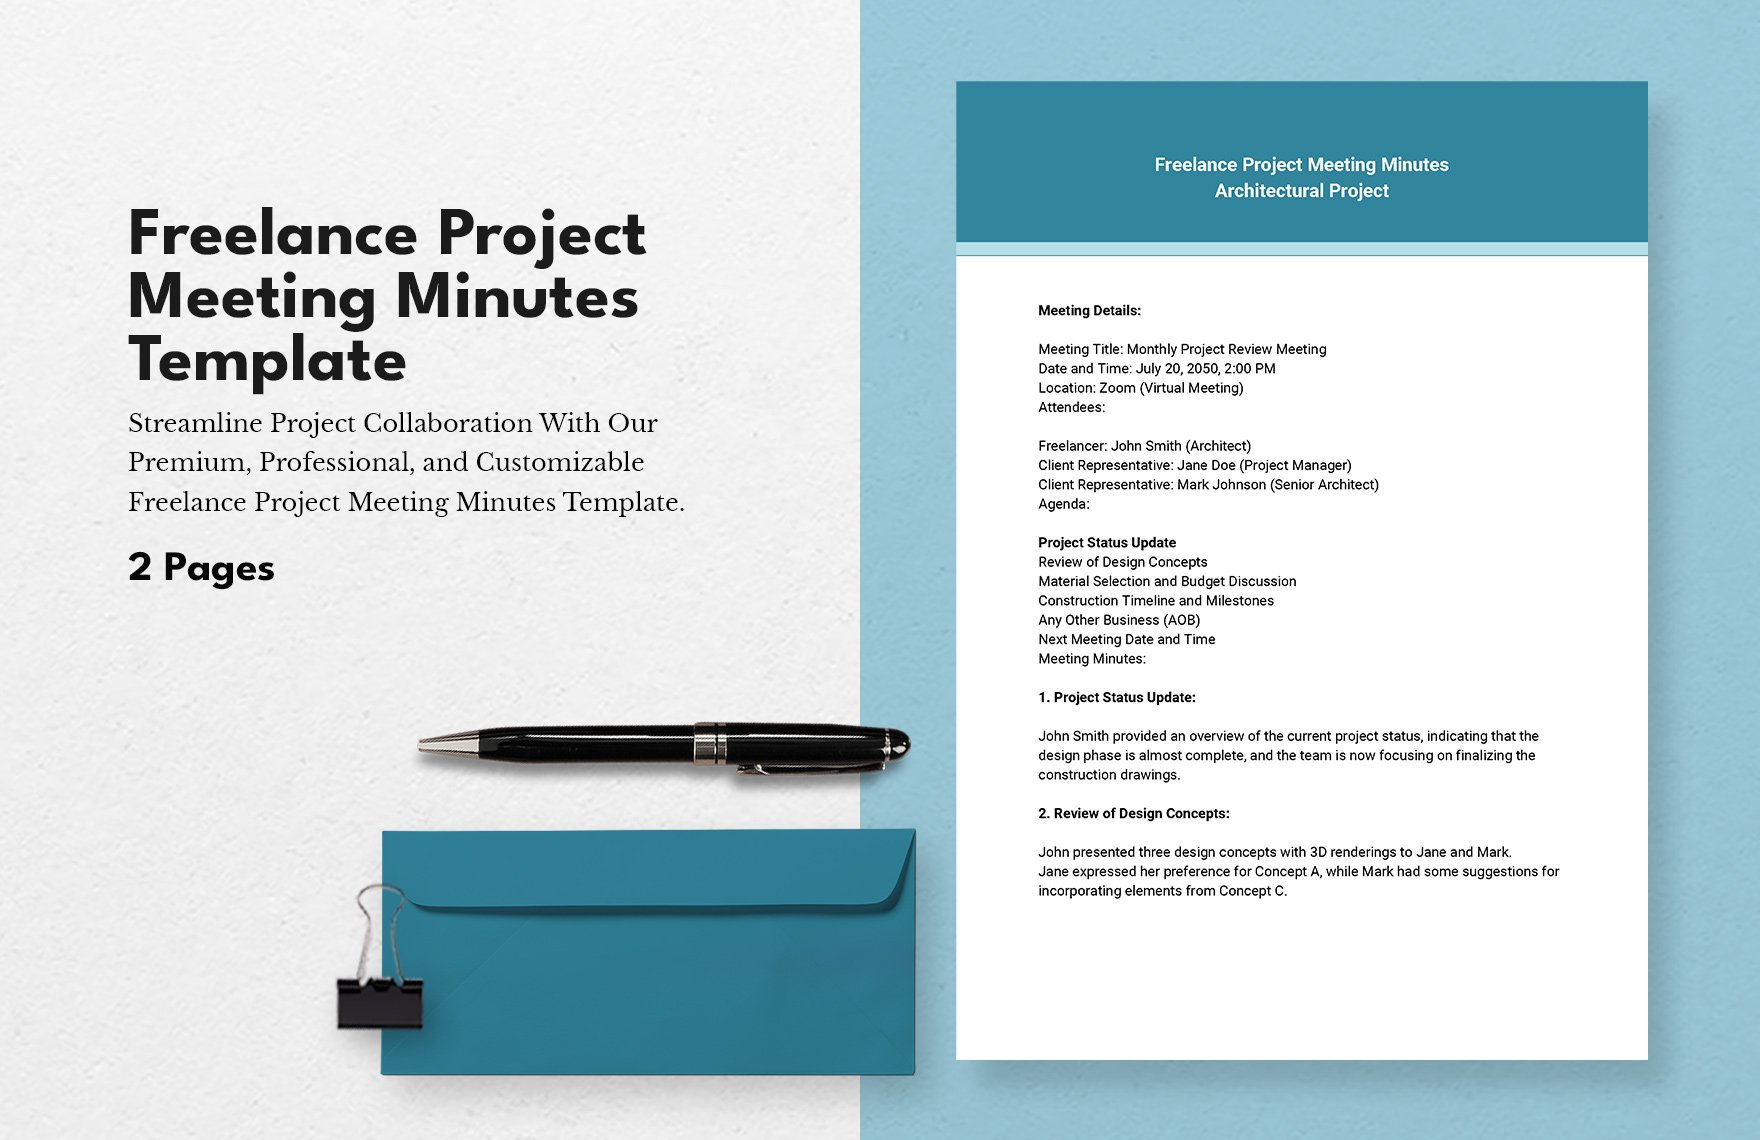 Freelance Project Meeting Minutes Template